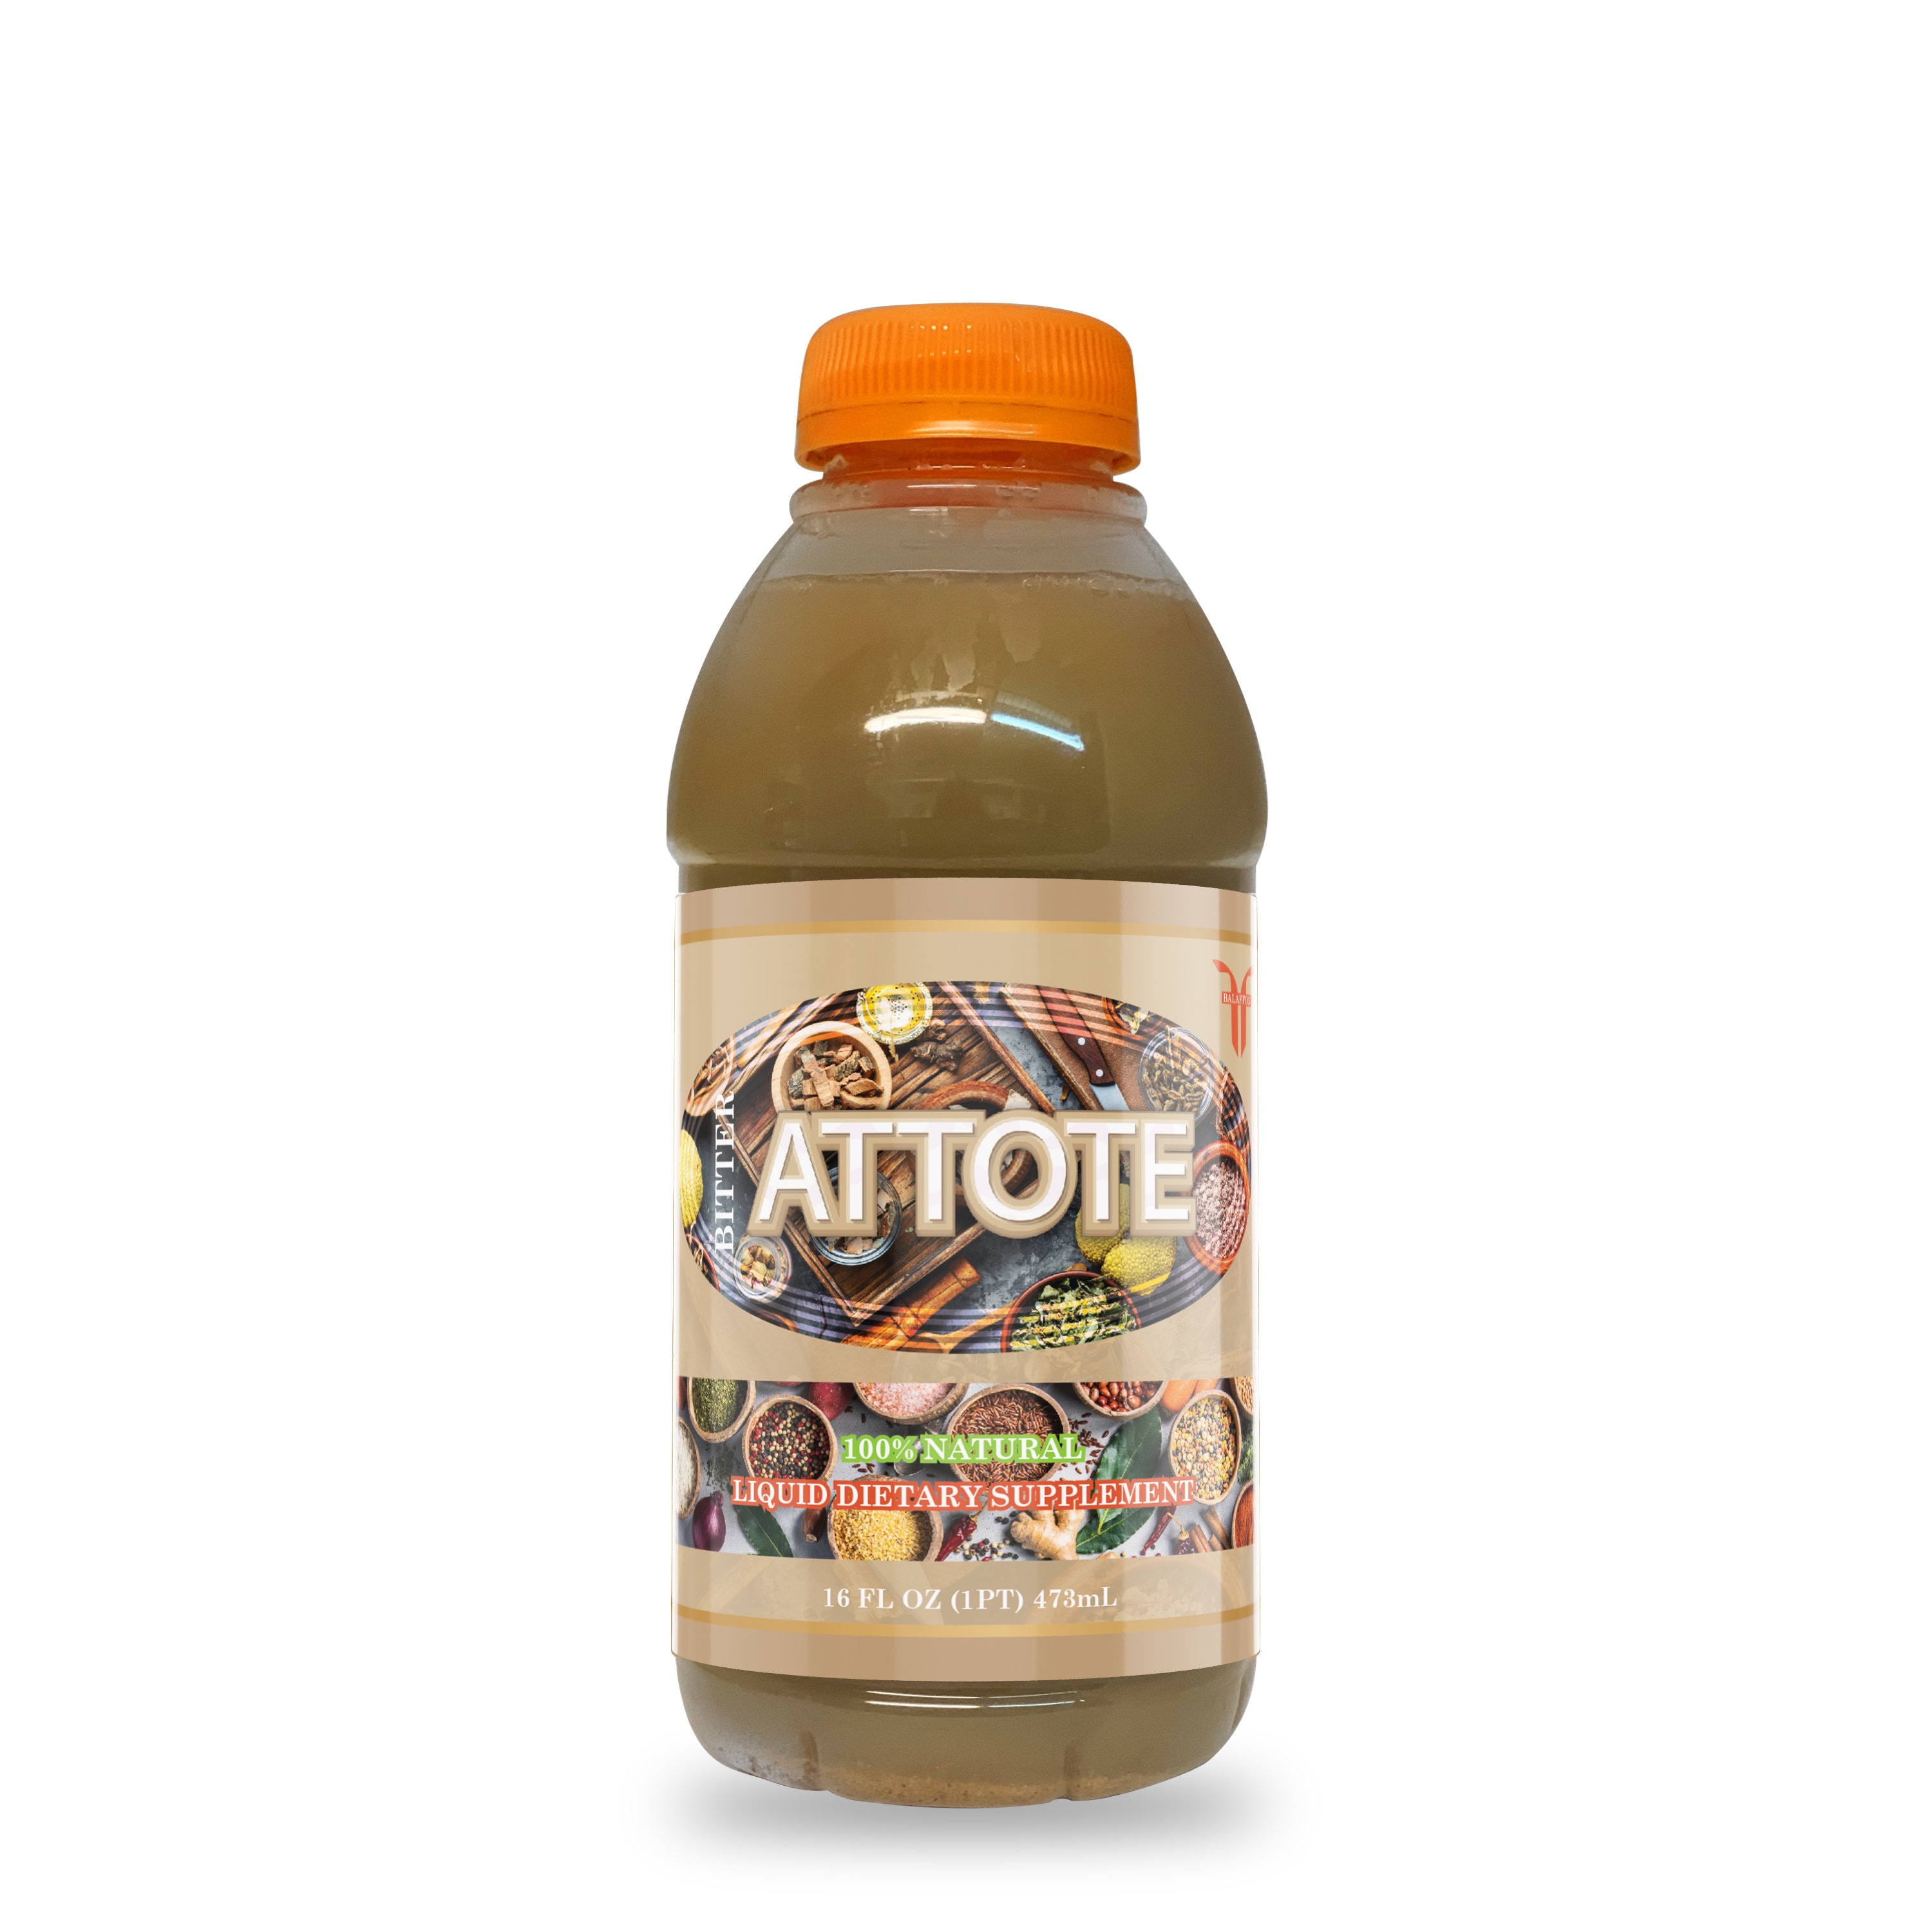 2 Bottles of All Natural Attote Herbal Mixture for Man Power -  Israel